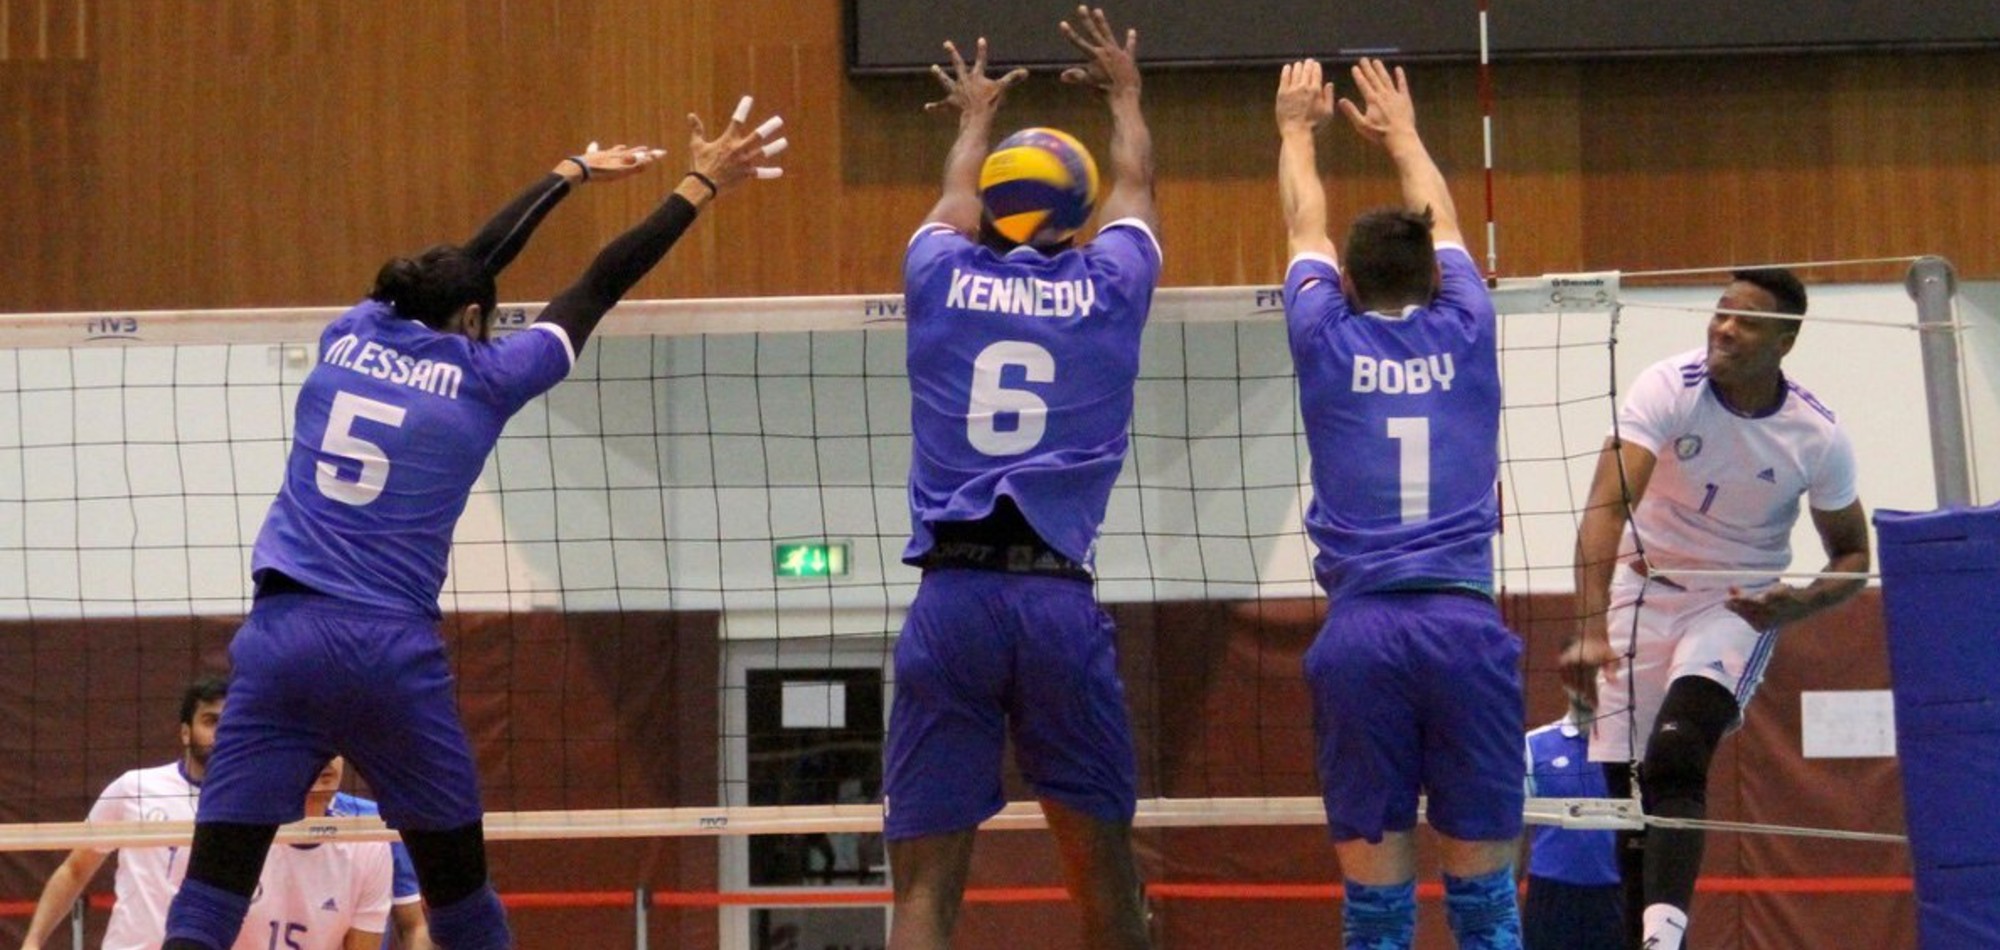 Qatar Volleyball Association Outlines Post-COVID Plans